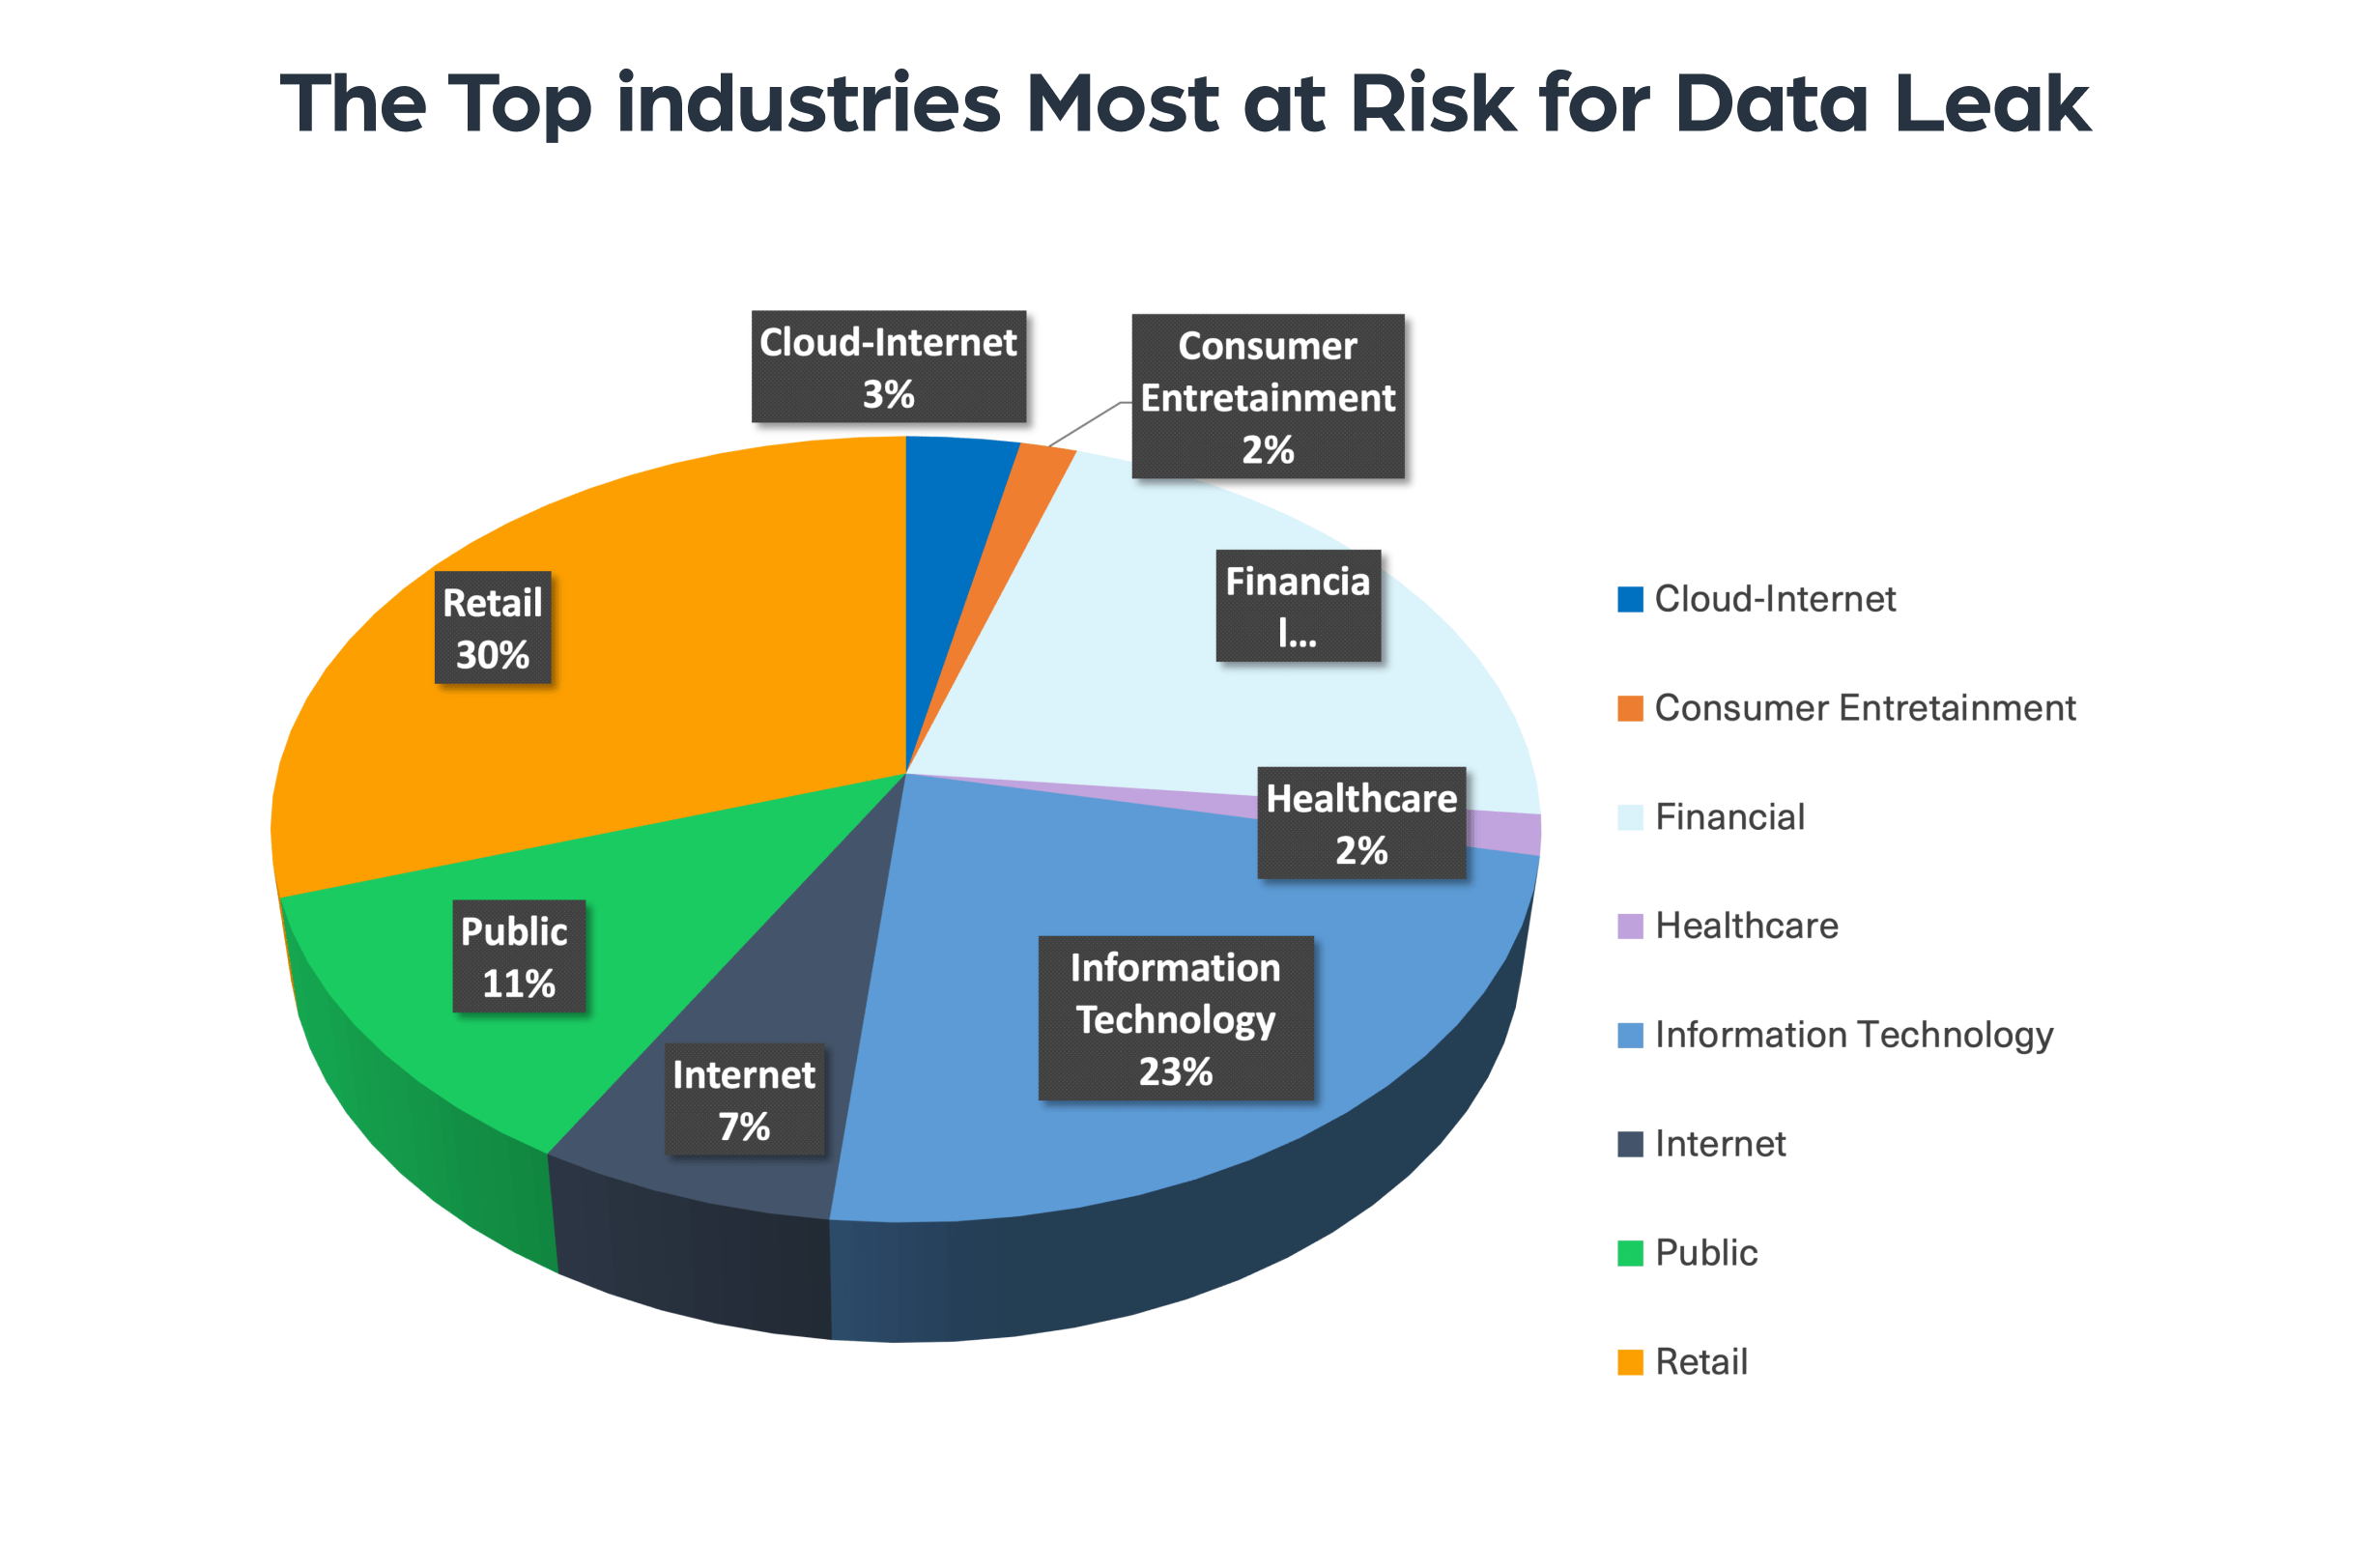 The top industries most at risk for data leak